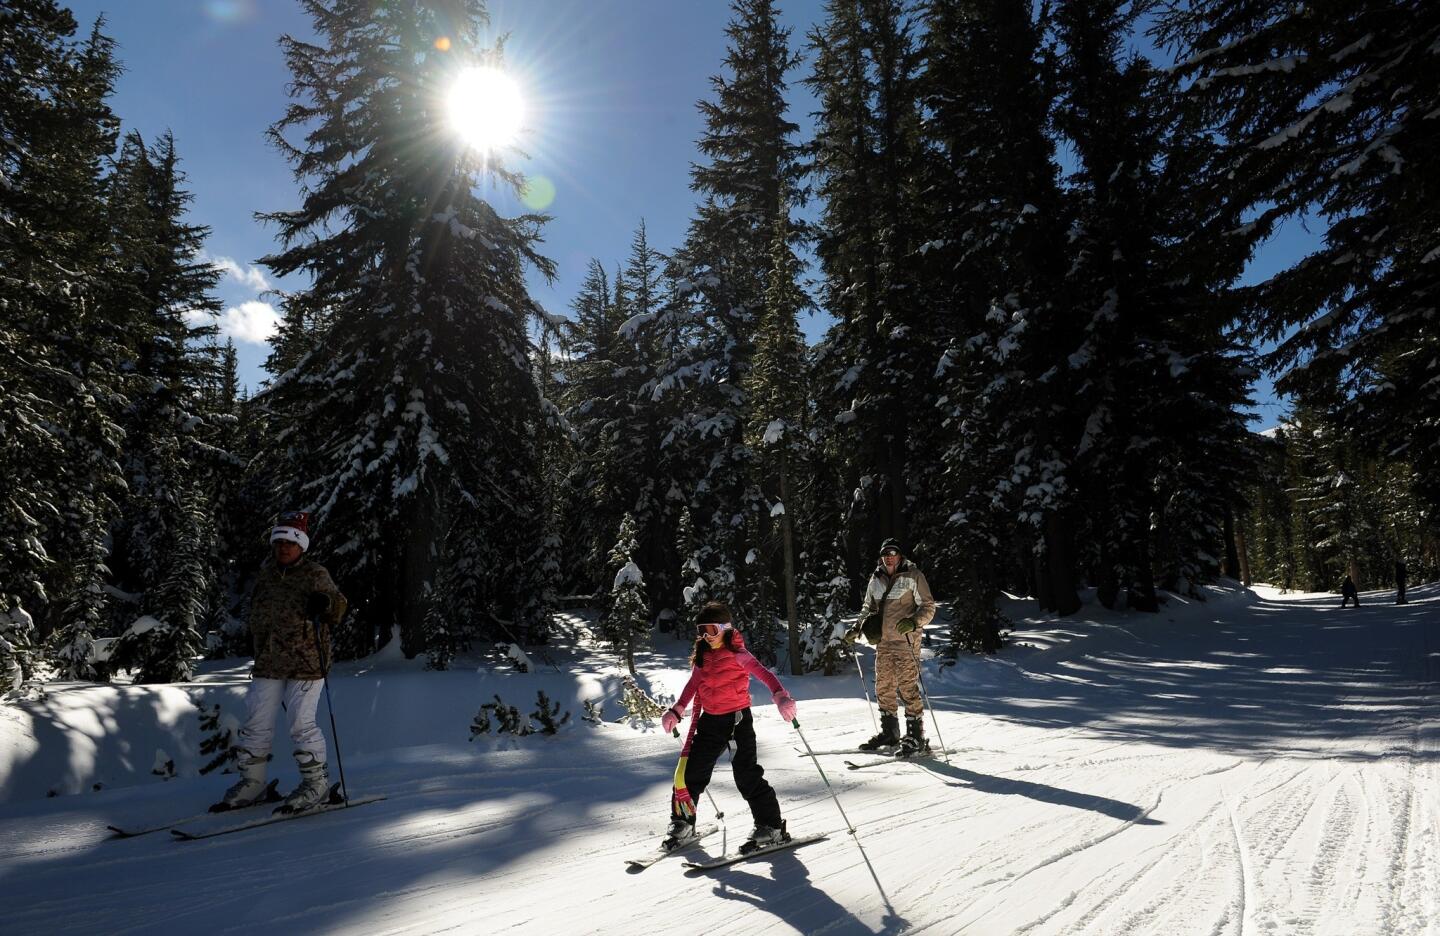 Skiers take advantage of the early snowfall at Mammoth Mountain resort.